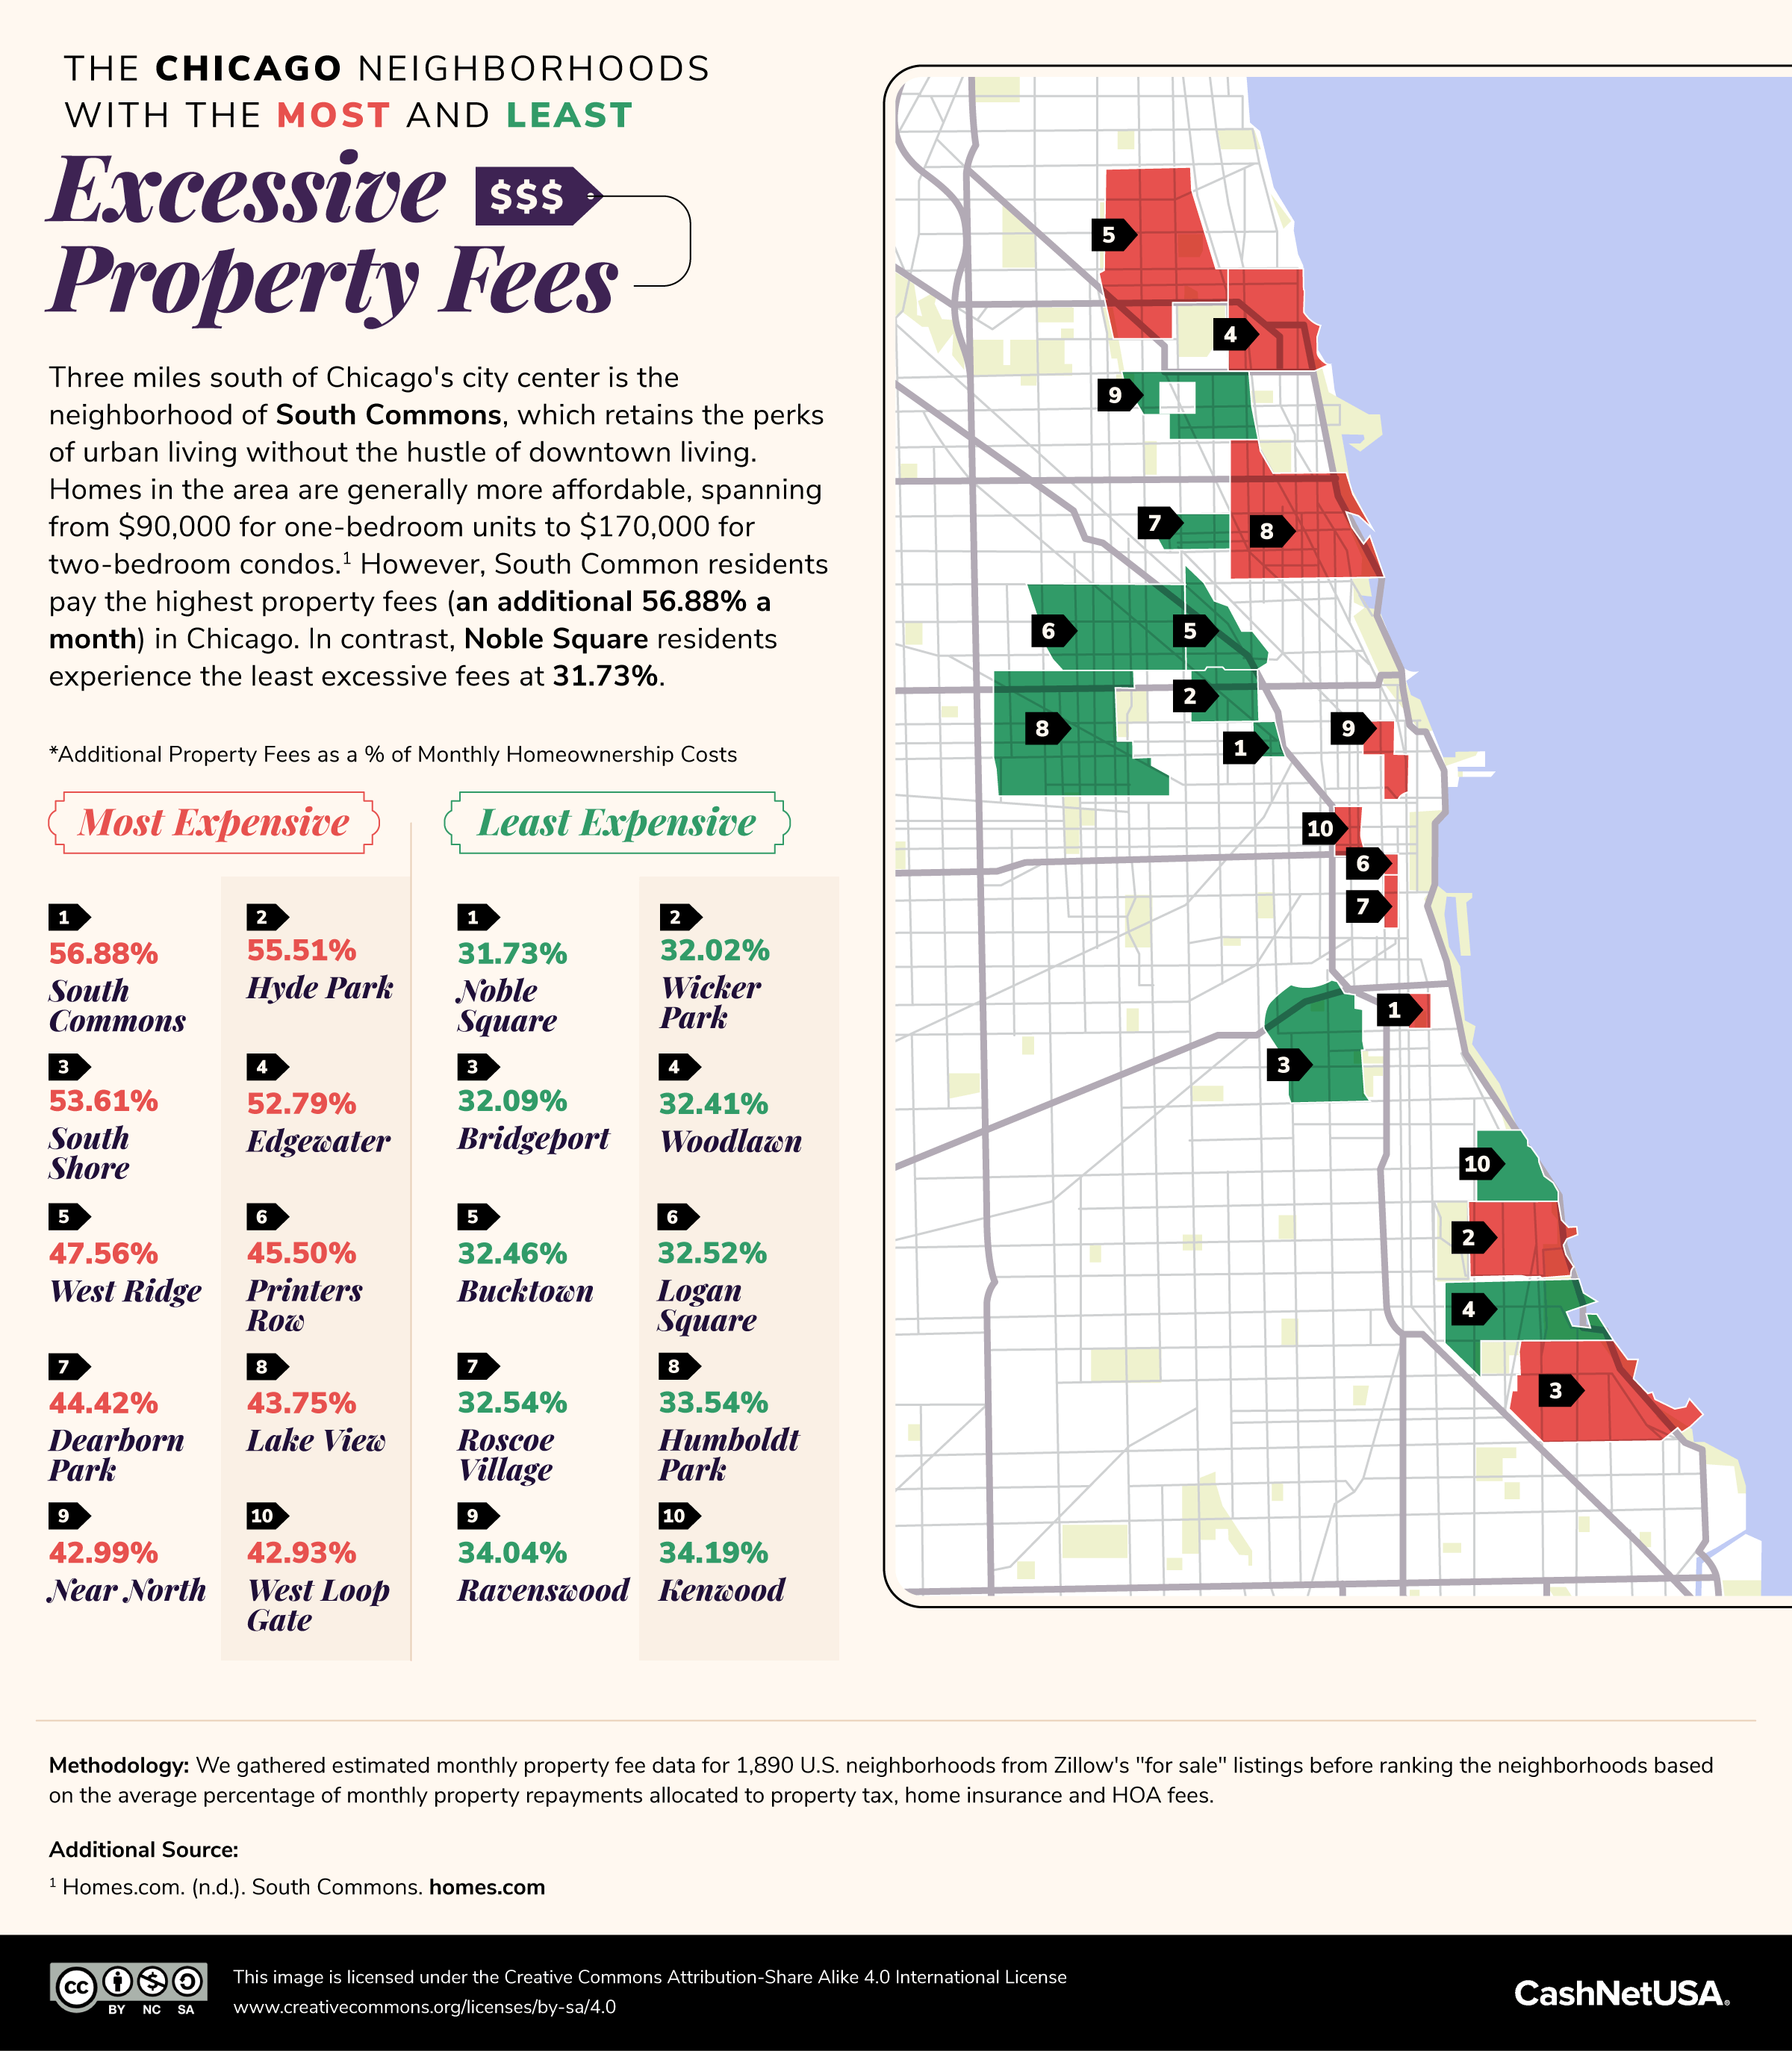 Chicago map and list of neighborhoods with the most and least excessive property fees